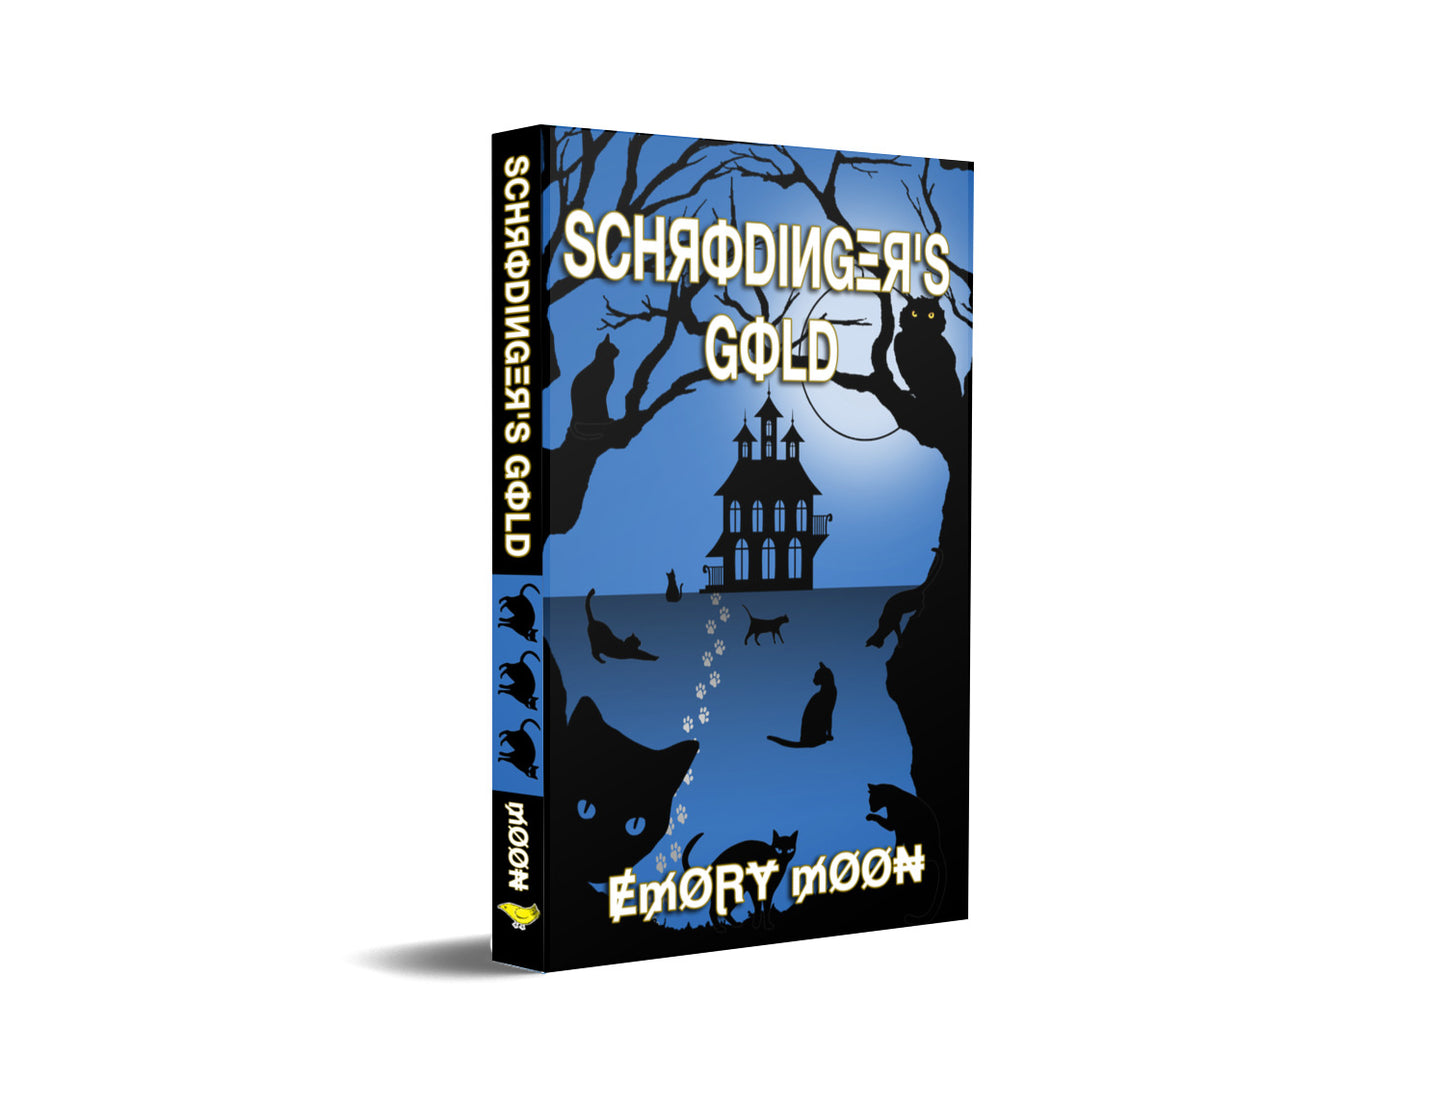 Schrodinger's Gold - Part 1 of the Peabody series (paperback)